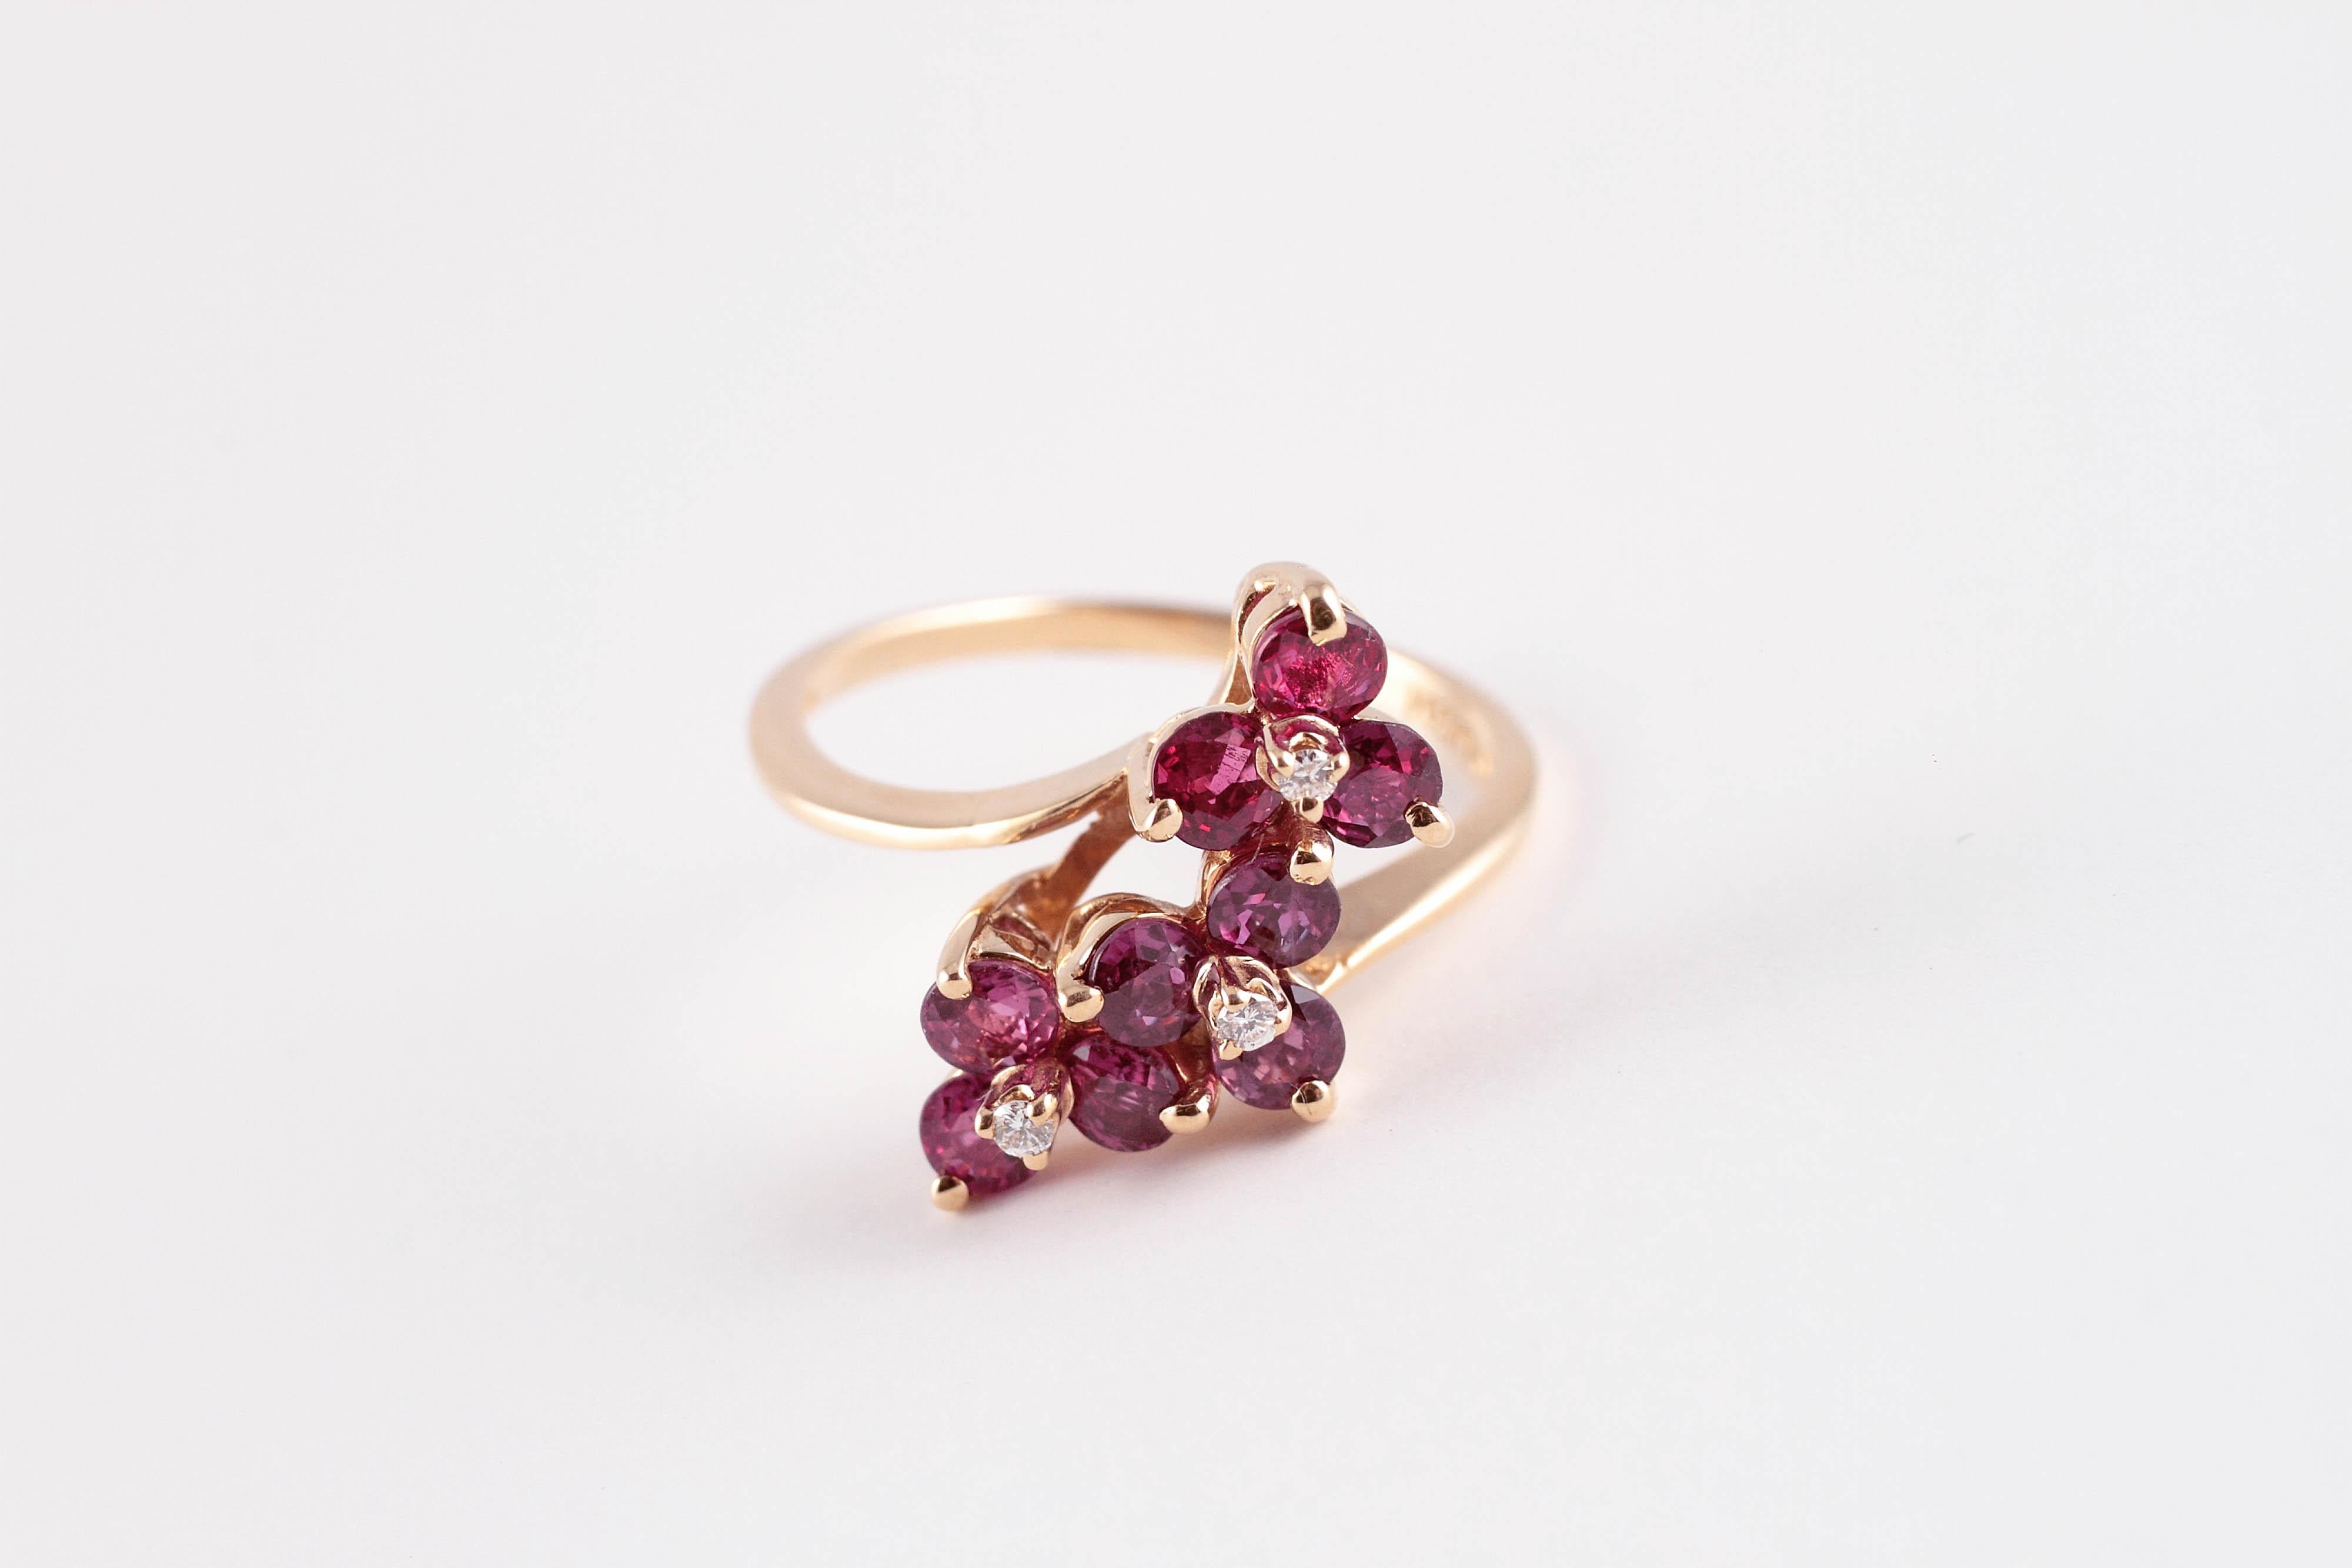 Round Cut 1.50 Carat Ruby Diamond Ring For Sale